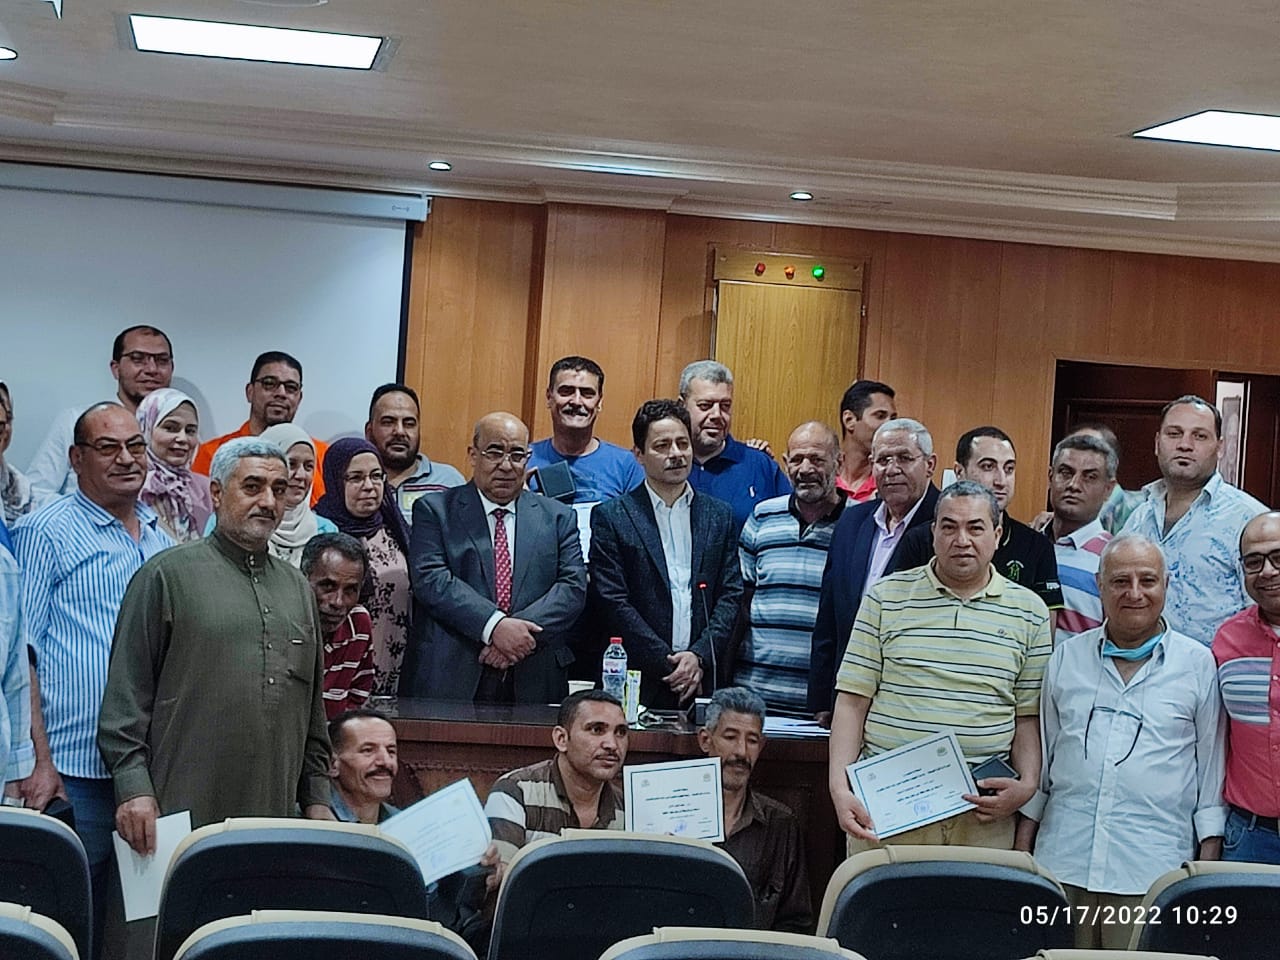 Celebration of Labor Day 2022 at the Faculty of Pharmacy - Mansoura University